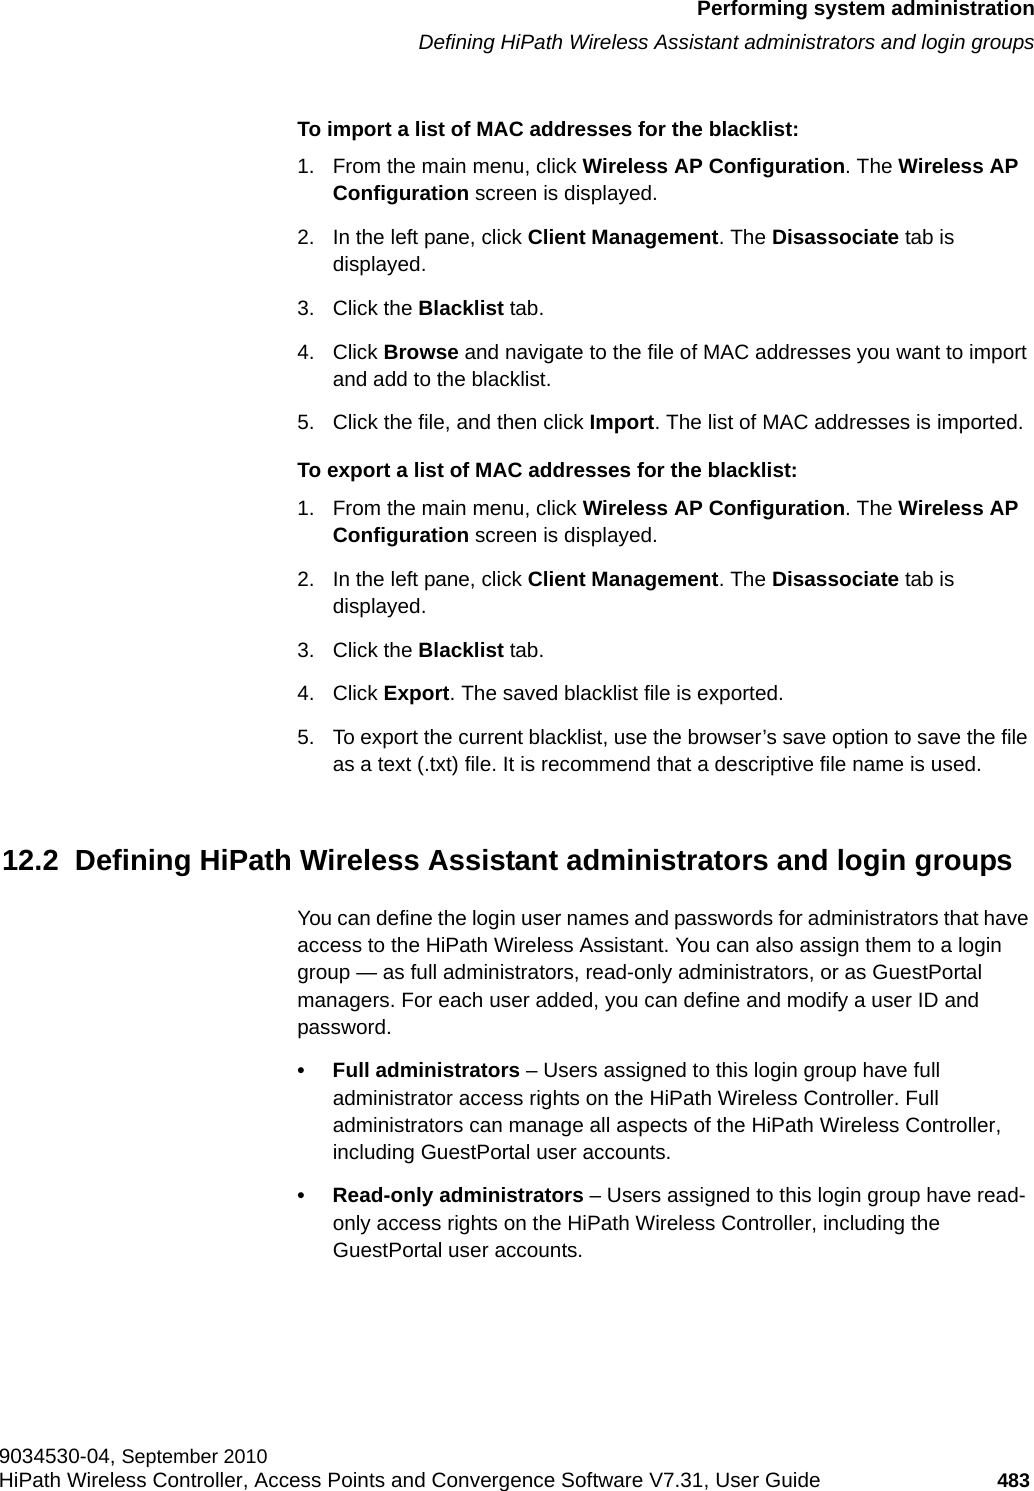 hwc_ongoing.fmPerforming system administrationDefining HiPath Wireless Assistant administrators and login groups9034530-04, September 2010HiPath Wireless Controller, Access Points and Convergence Software V7.31, User Guide 483         To import a list of MAC addresses for the blacklist:1. From the main menu, click Wireless AP Configuration. The Wireless AP Configuration screen is displayed.2. In the left pane, click Client Management. The Disassociate tab is displayed.3. Click the Blacklist tab.4. Click Browse and navigate to the file of MAC addresses you want to import and add to the blacklist.5. Click the file, and then click Import. The list of MAC addresses is imported.To export a list of MAC addresses for the blacklist:1. From the main menu, click Wireless AP Configuration. The Wireless AP Configuration screen is displayed.2. In the left pane, click Client Management. The Disassociate tab is displayed.3. Click the Blacklist tab.4. Click Export. The saved blacklist file is exported.5. To export the current blacklist, use the browser’s save option to save the file as a text (.txt) file. It is recommend that a descriptive file name is used.12.2  Defining HiPath Wireless Assistant administrators and login groupsYou can define the login user names and passwords for administrators that have access to the HiPath Wireless Assistant. You can also assign them to a login group — as full administrators, read-only administrators, or as GuestPortal managers. For each user added, you can define and modify a user ID and password. • Full administrators – Users assigned to this login group have full administrator access rights on the HiPath Wireless Controller. Full administrators can manage all aspects of the HiPath Wireless Controller, including GuestPortal user accounts.• Read-only administrators – Users assigned to this login group have read-only access rights on the HiPath Wireless Controller, including the GuestPortal user accounts.